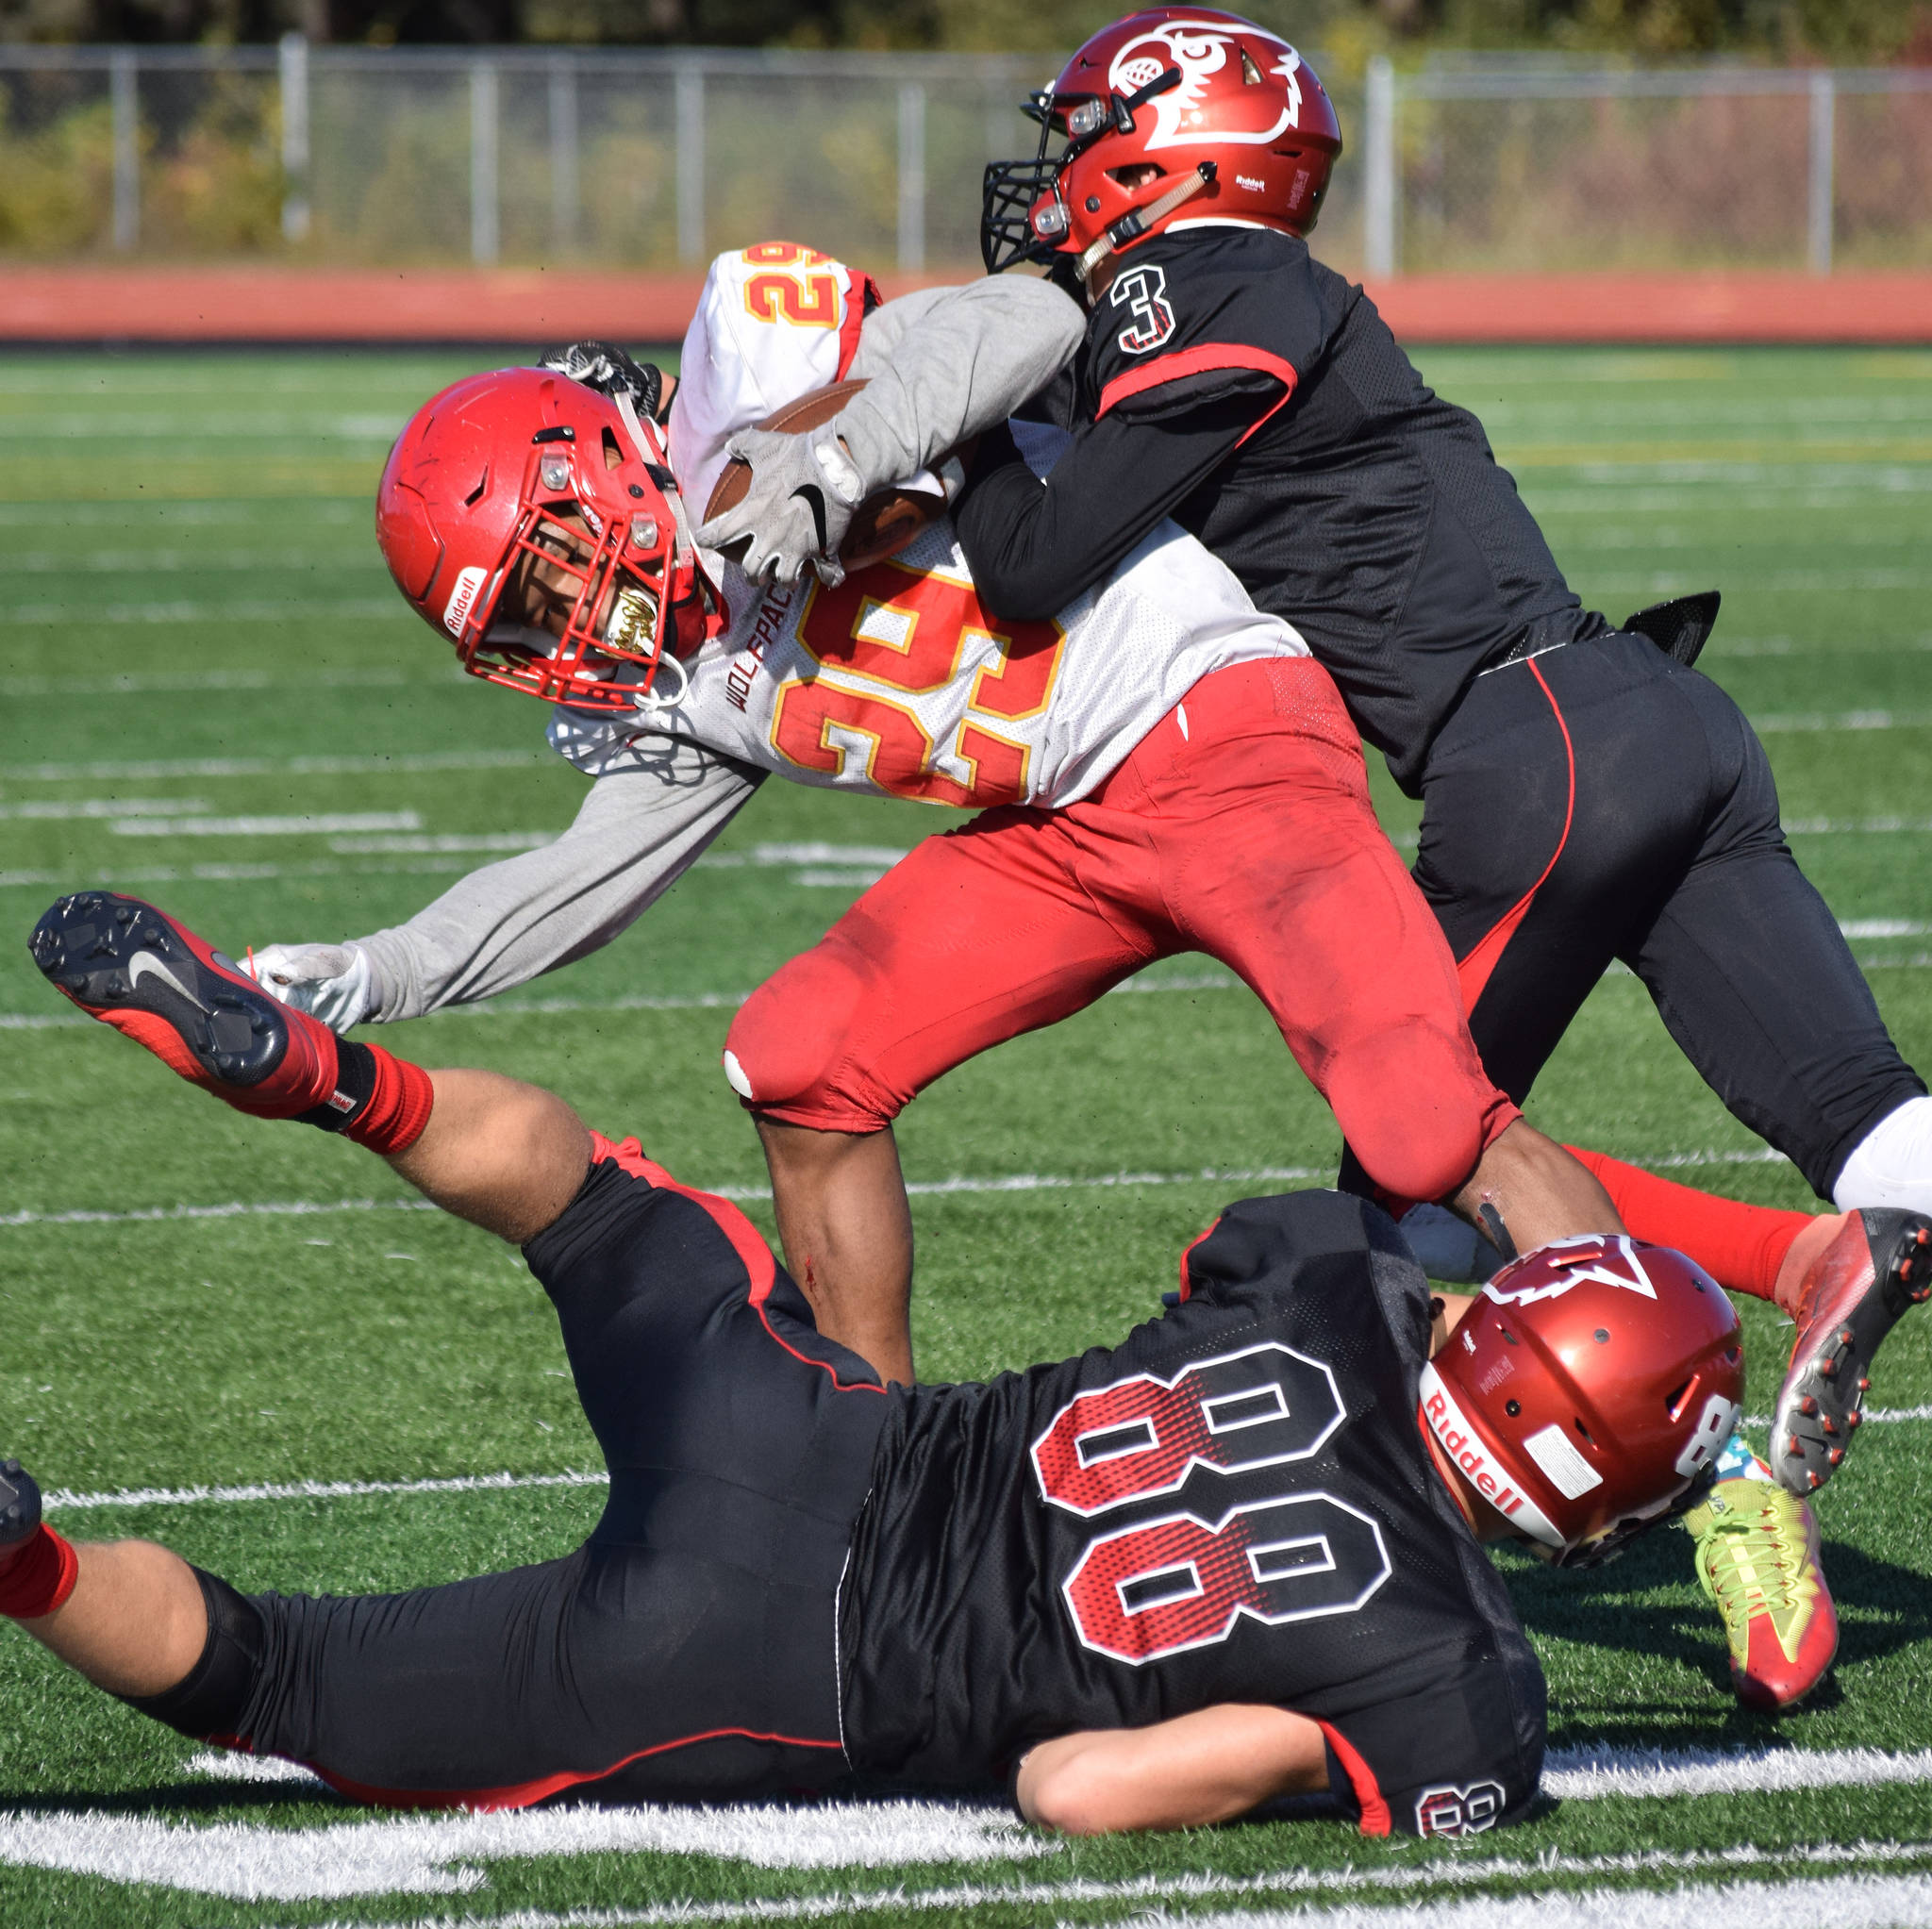 West Valley running back Justin Cummings is tackled by Kenai Central’s Jordan Smith (top) and Braedon Pitsch, Saturday, Sept. 14, 2019, at Ed Hollier Field in Kenai, Alaska. (Photo by Joey Klecka/Peninsula Clarion)